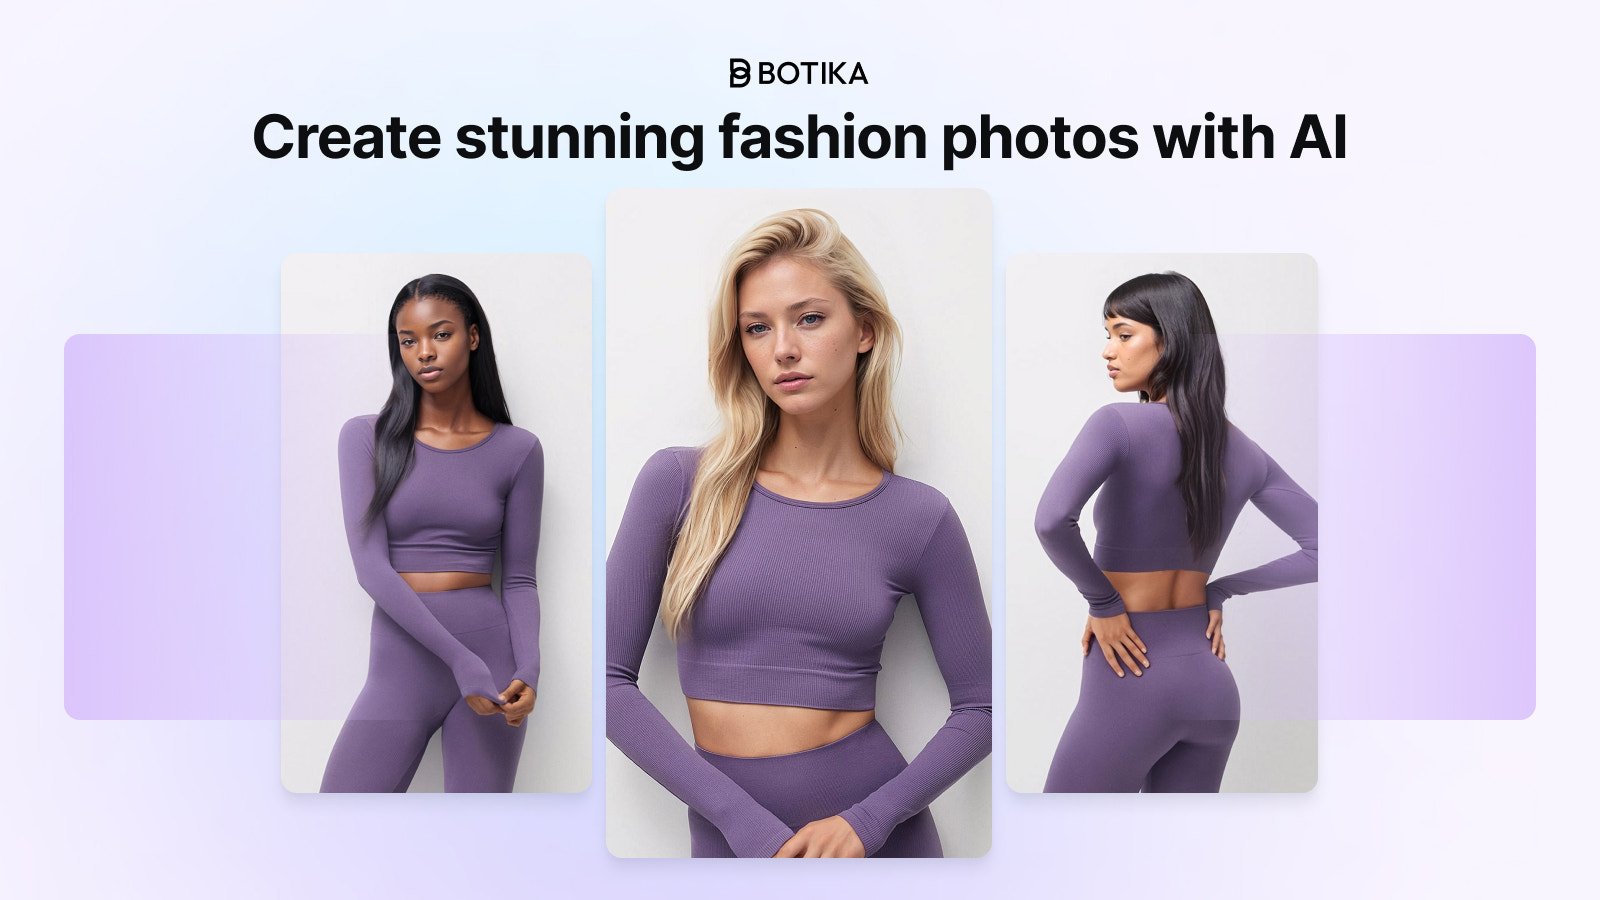 Upgrade your photos using AI fashion models and backgrounds